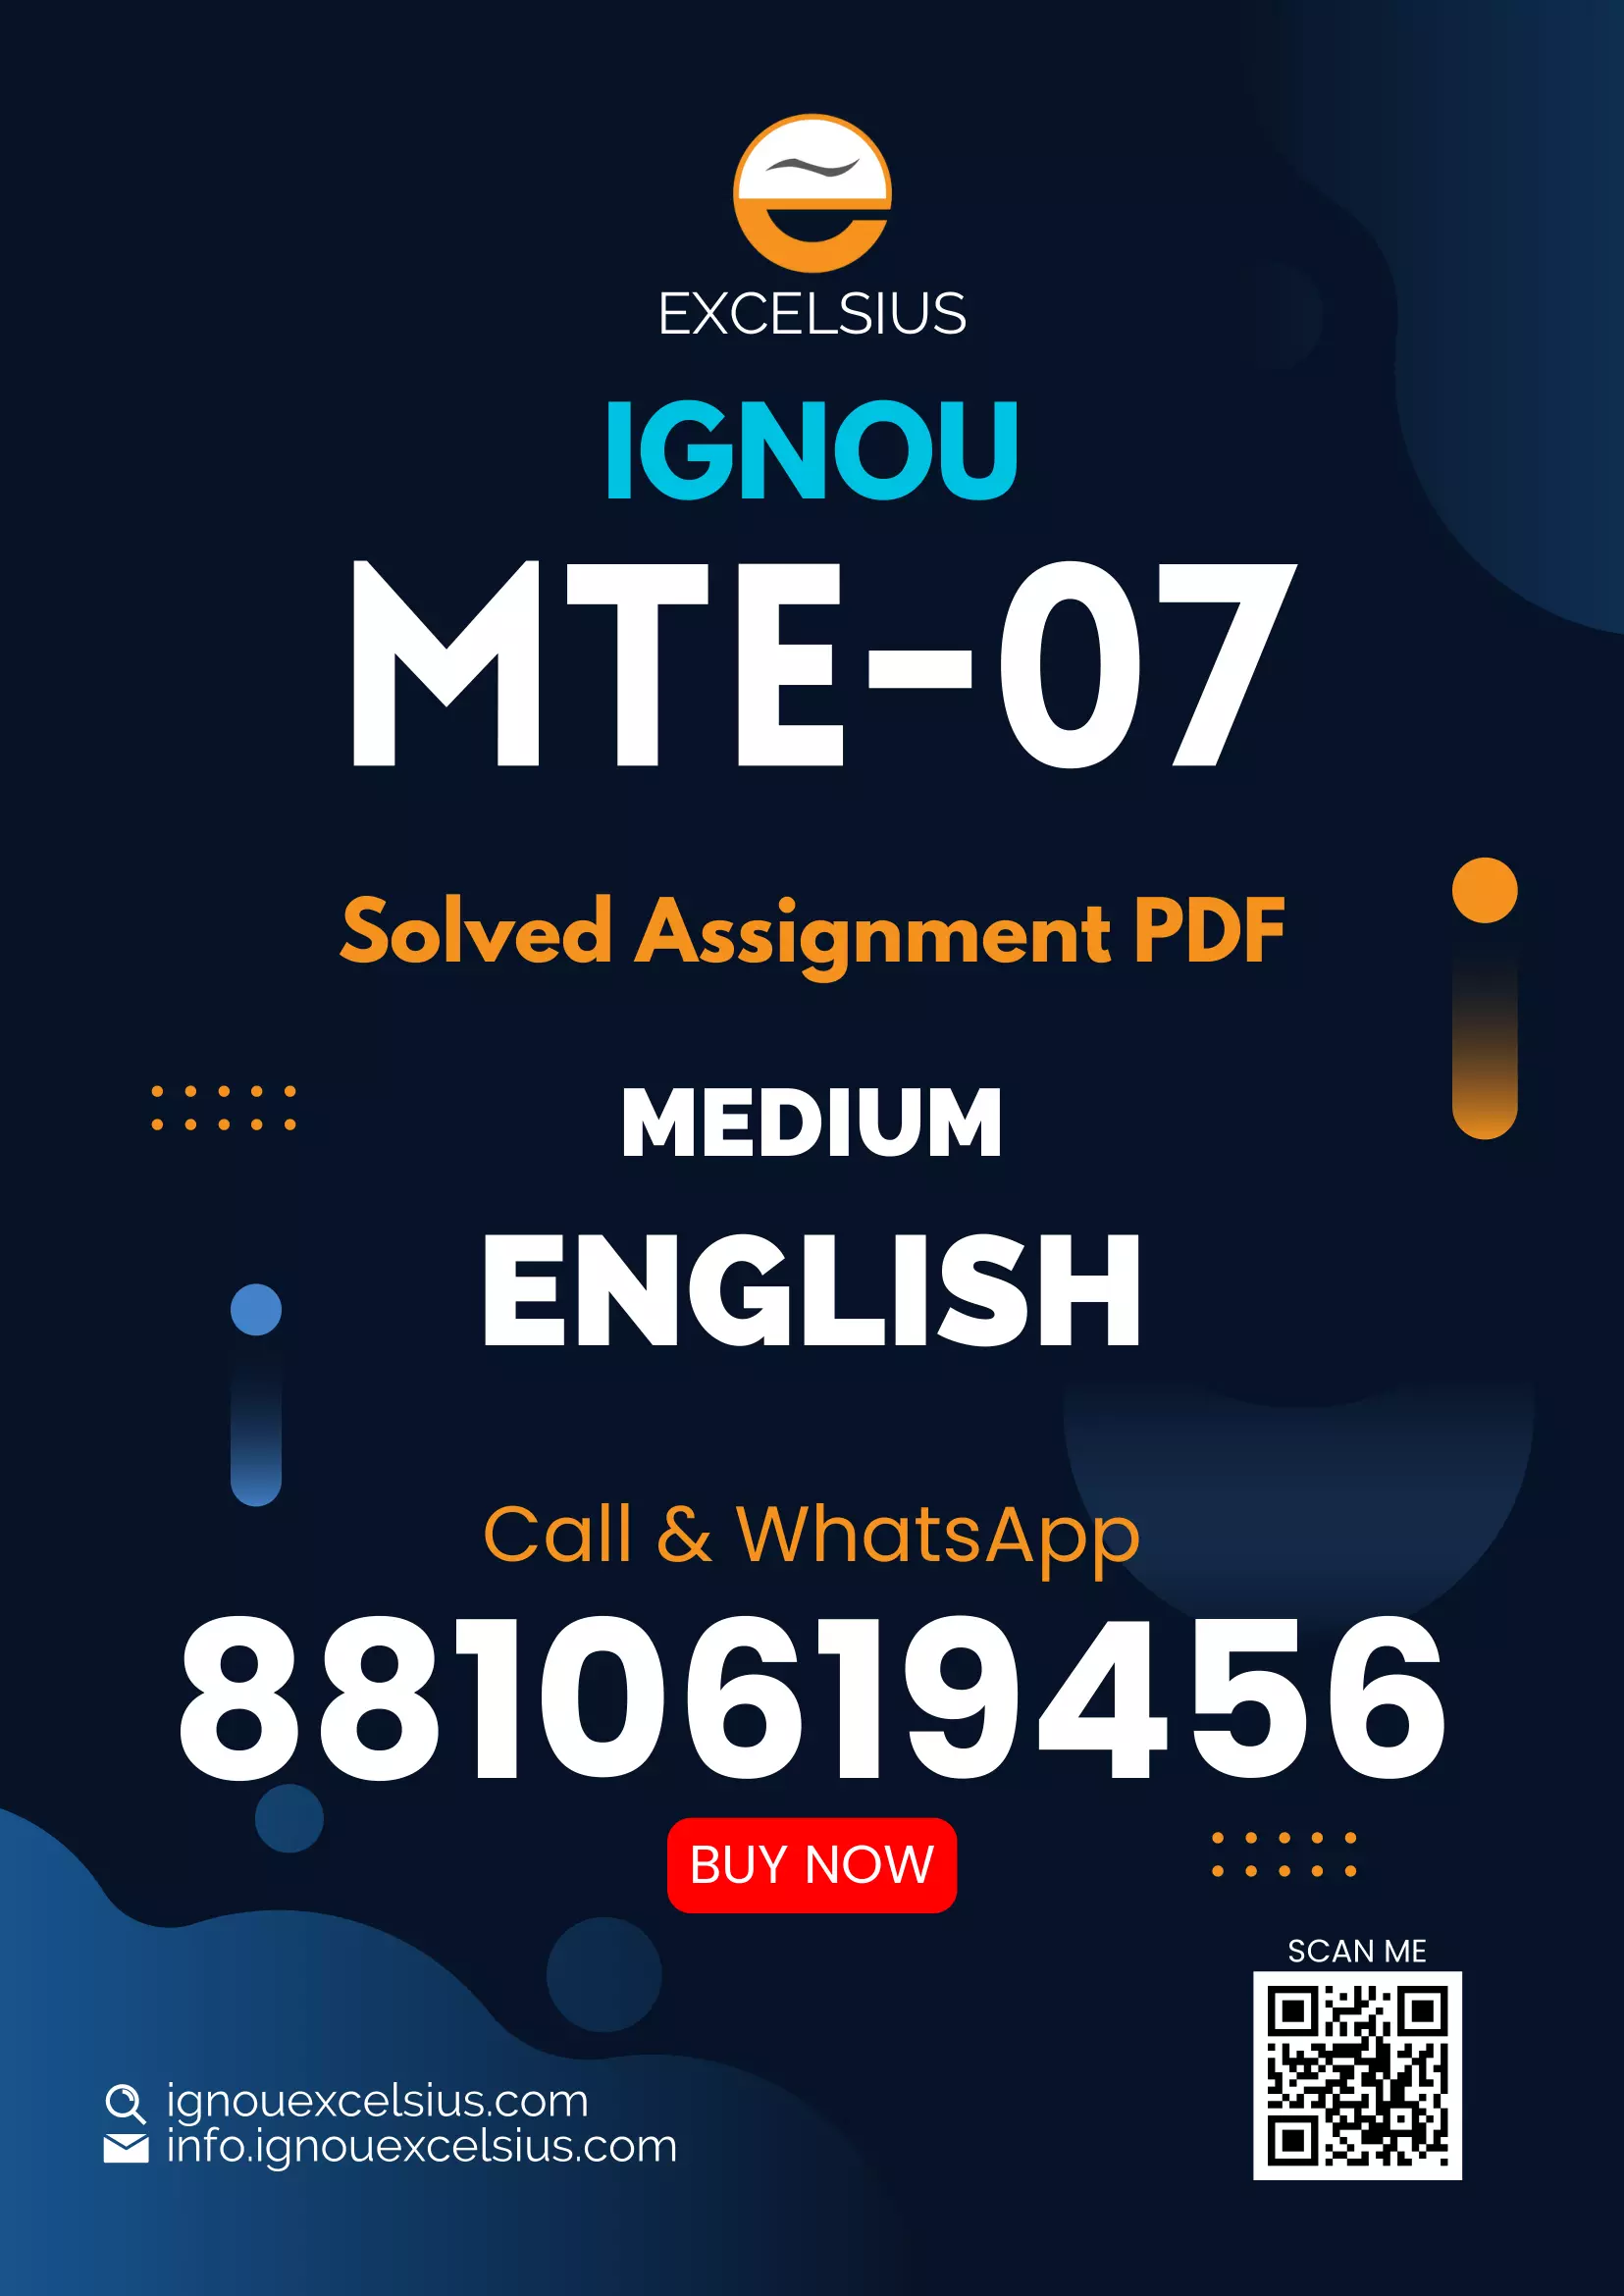 IGNOU MTE-07 - Advanced Calculus, Latest Solved Assignment-January 2023 - December 2023